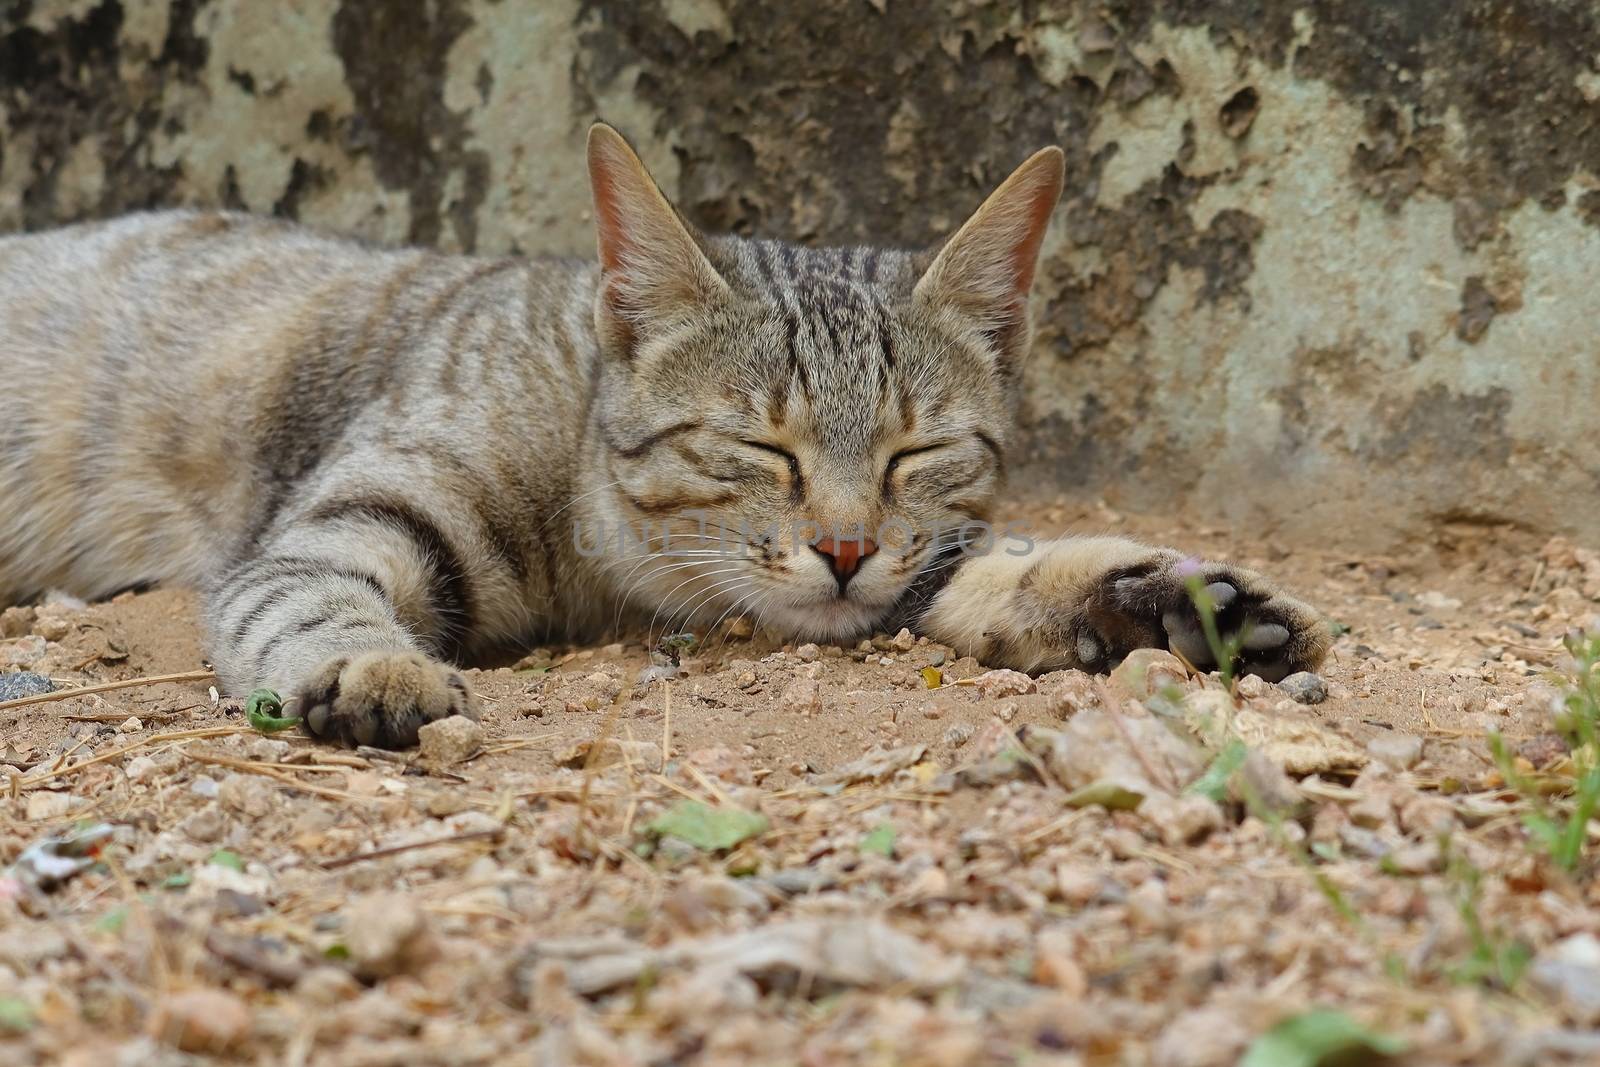 A young cat sleeping on the ground with legs spread